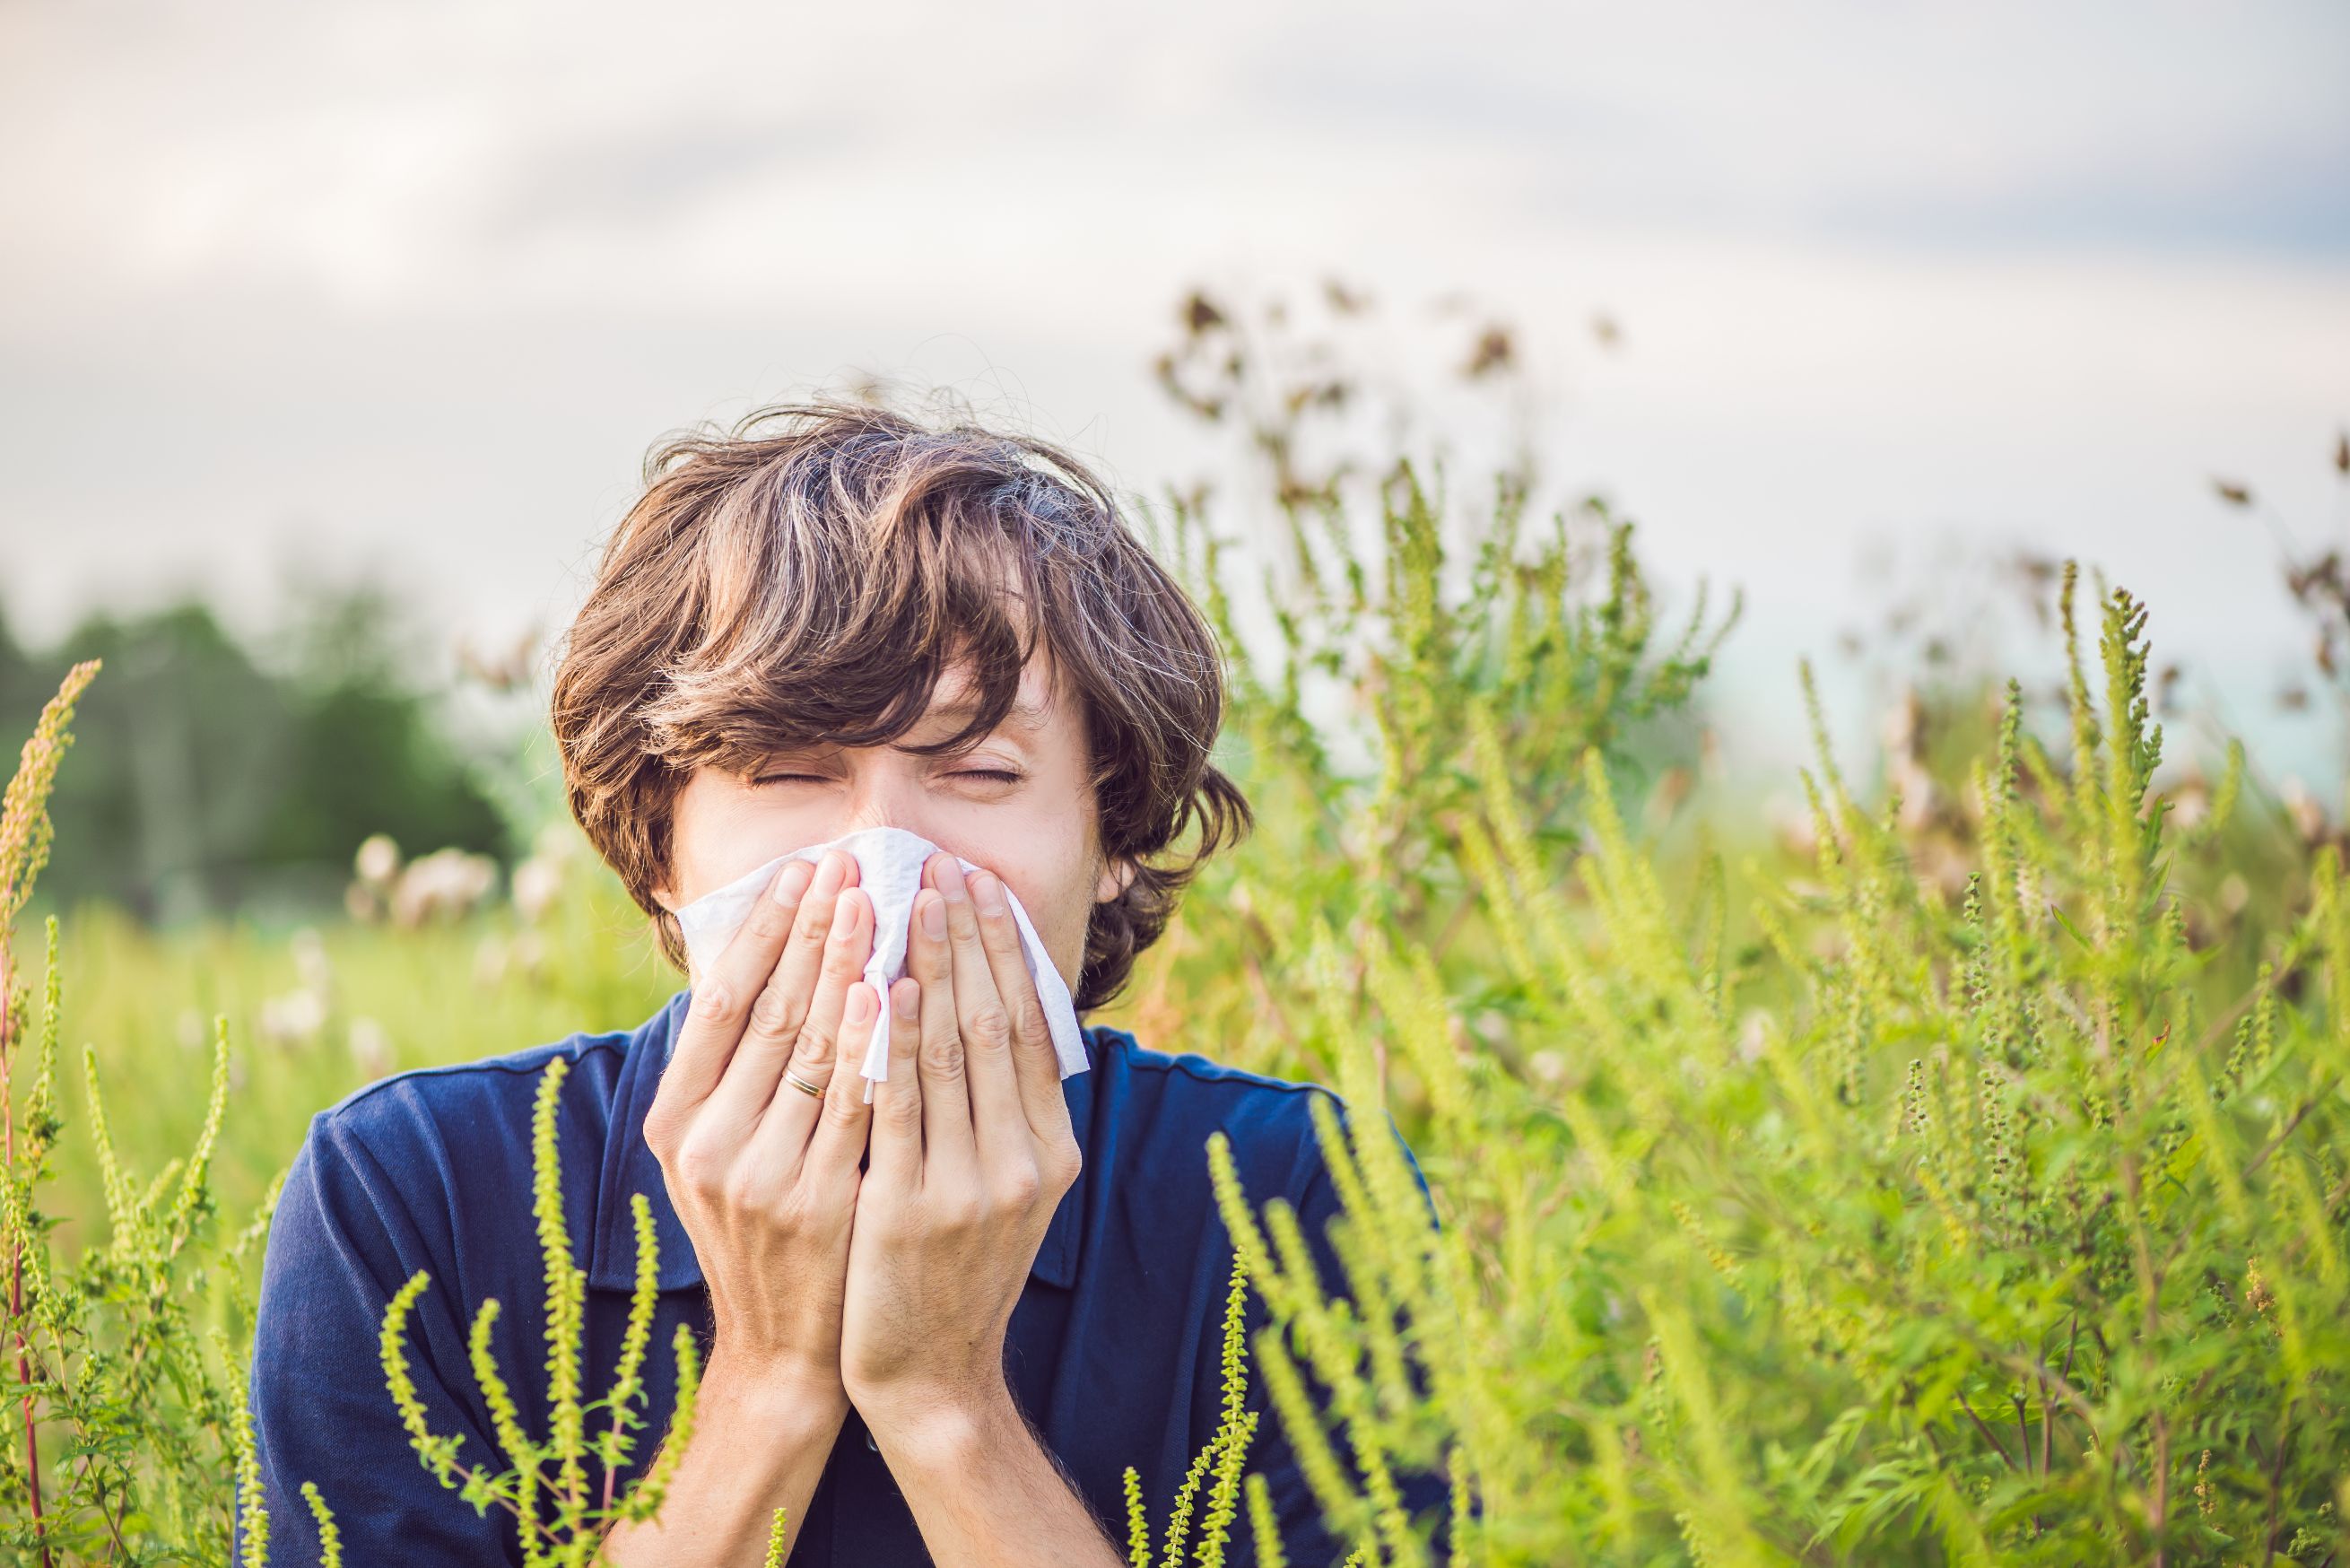 Pollen allergy - Why is an investigation important?